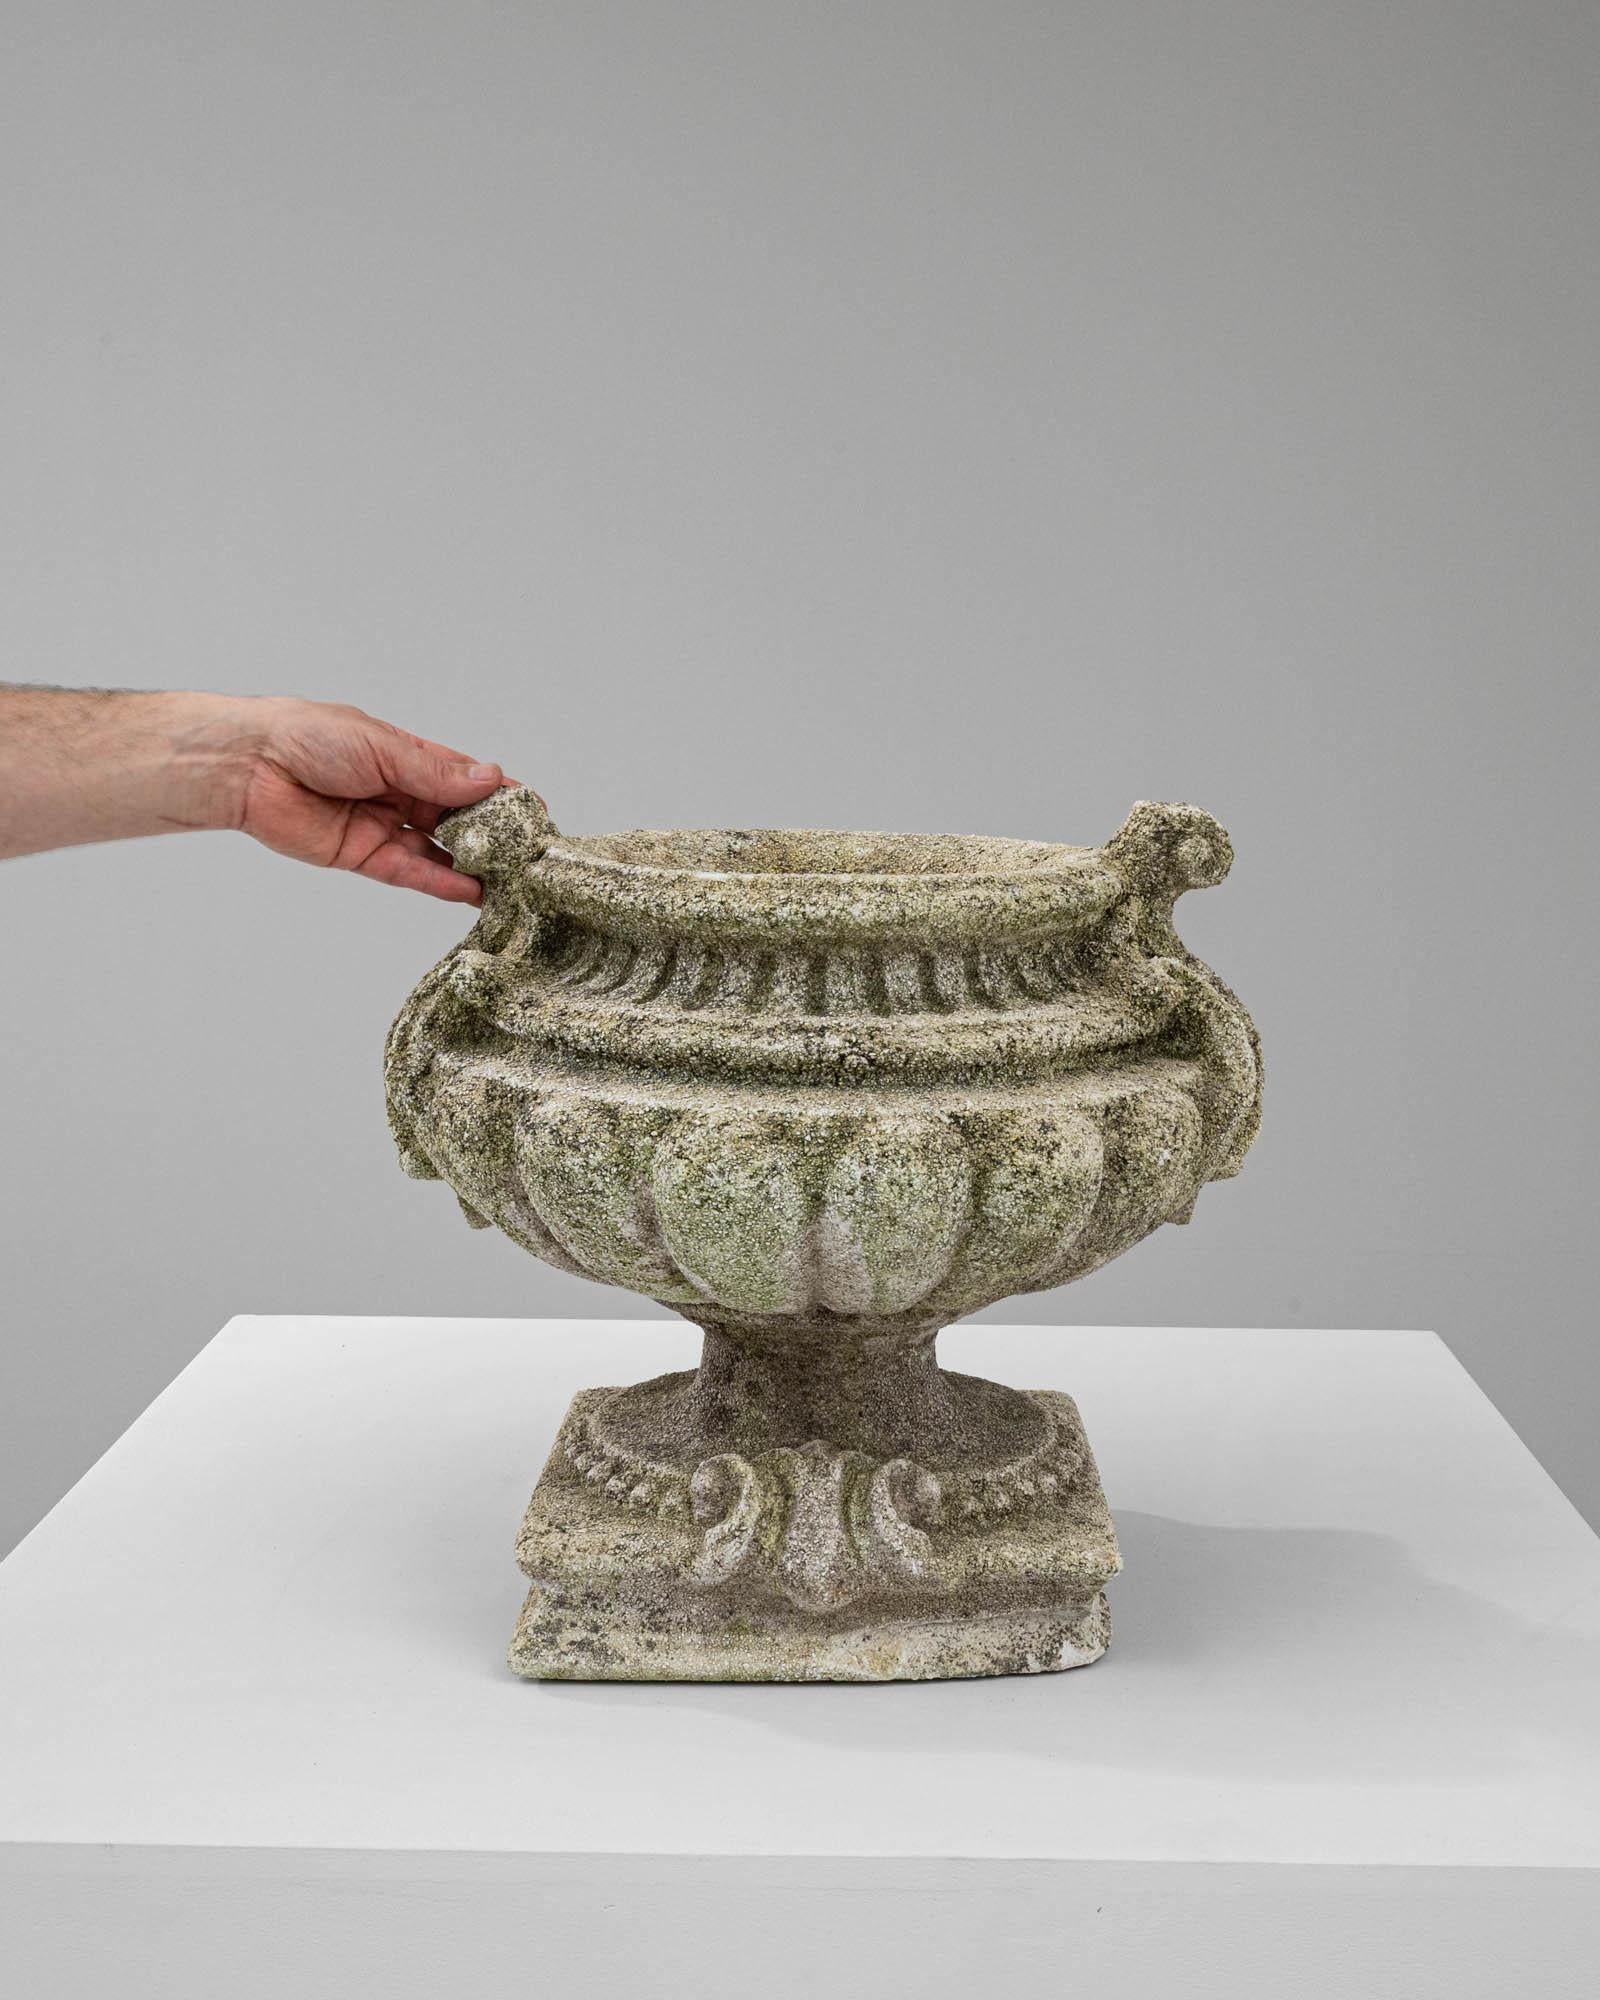 This 20th-century French concrete planter is a stunning piece that combines the robustness of its material with the delicacy of its ornate design. It features classical detailing, such as gadrooning and scrollwork, which are softly highlighted by